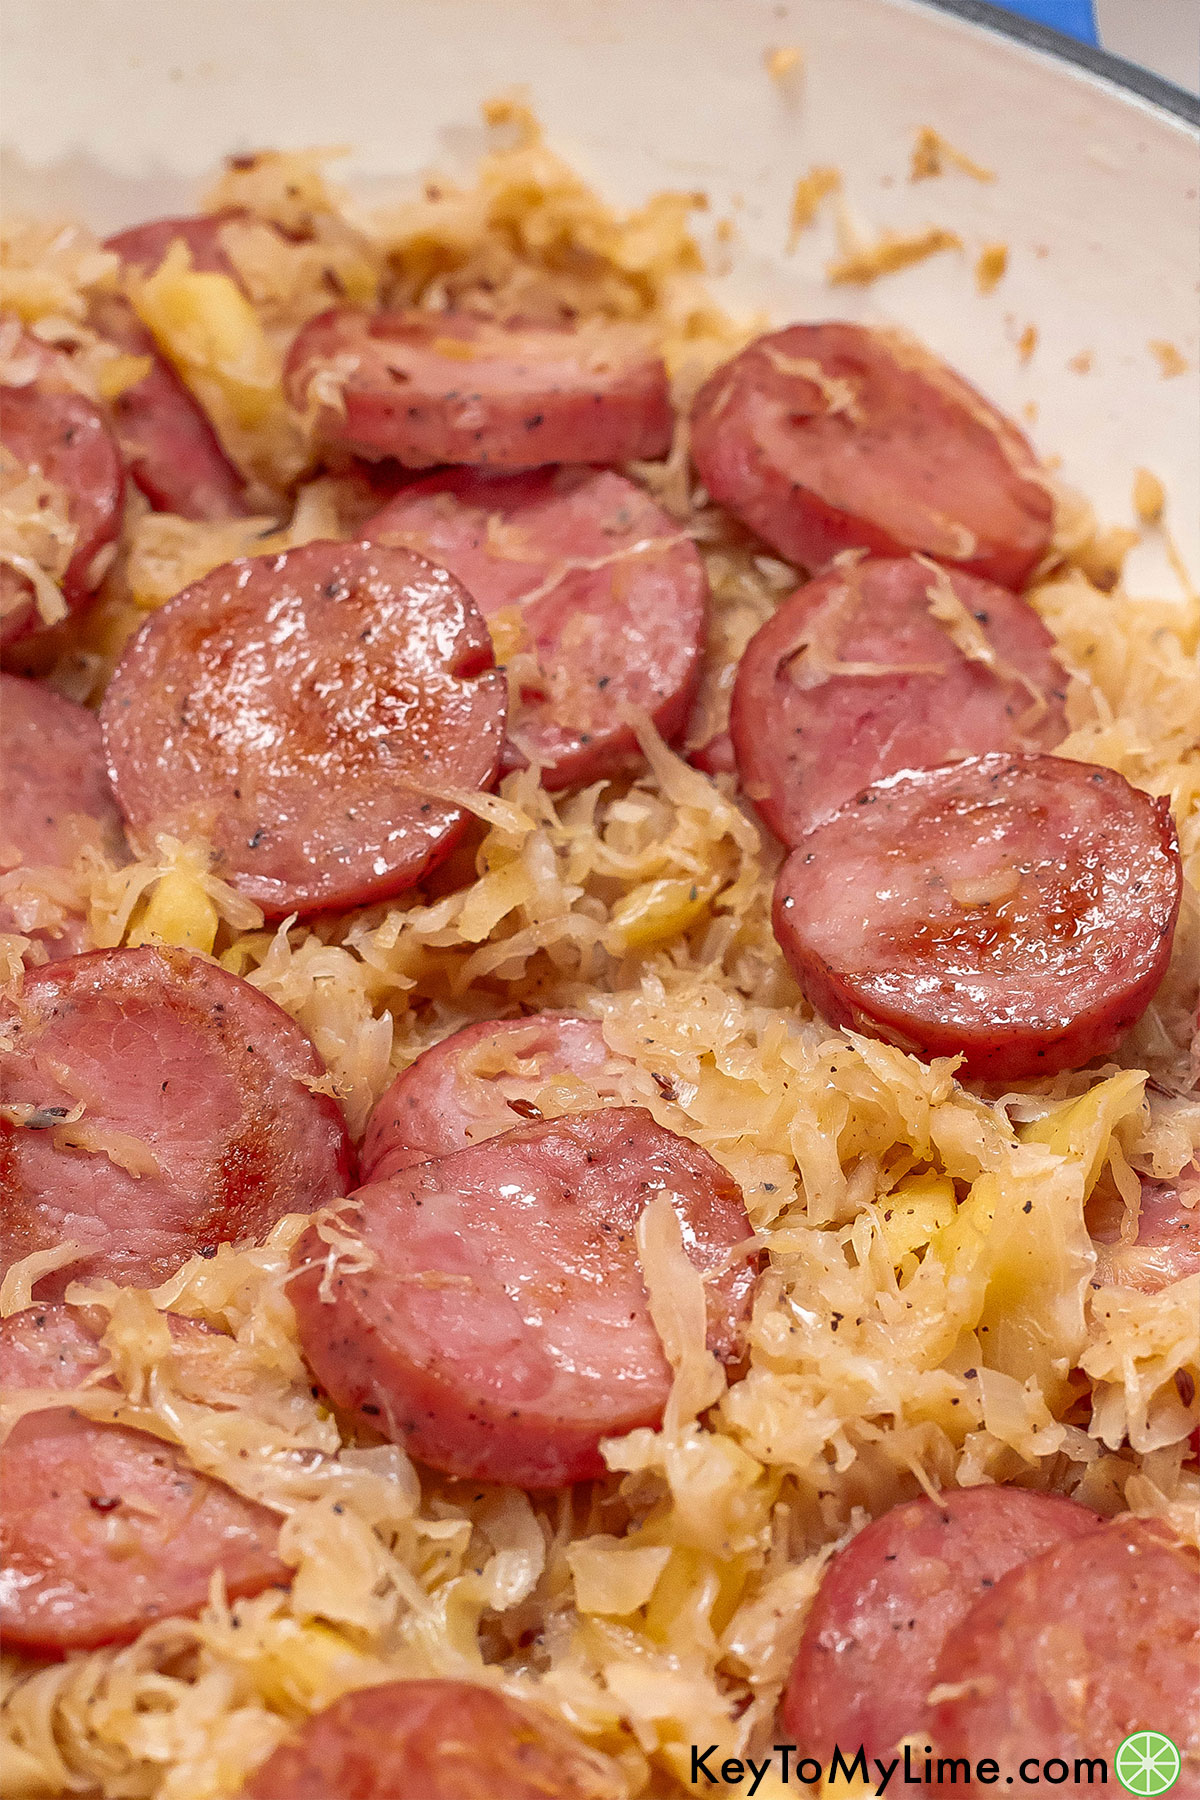 A close up image showing the texture of the cooked kielbasa rounds.